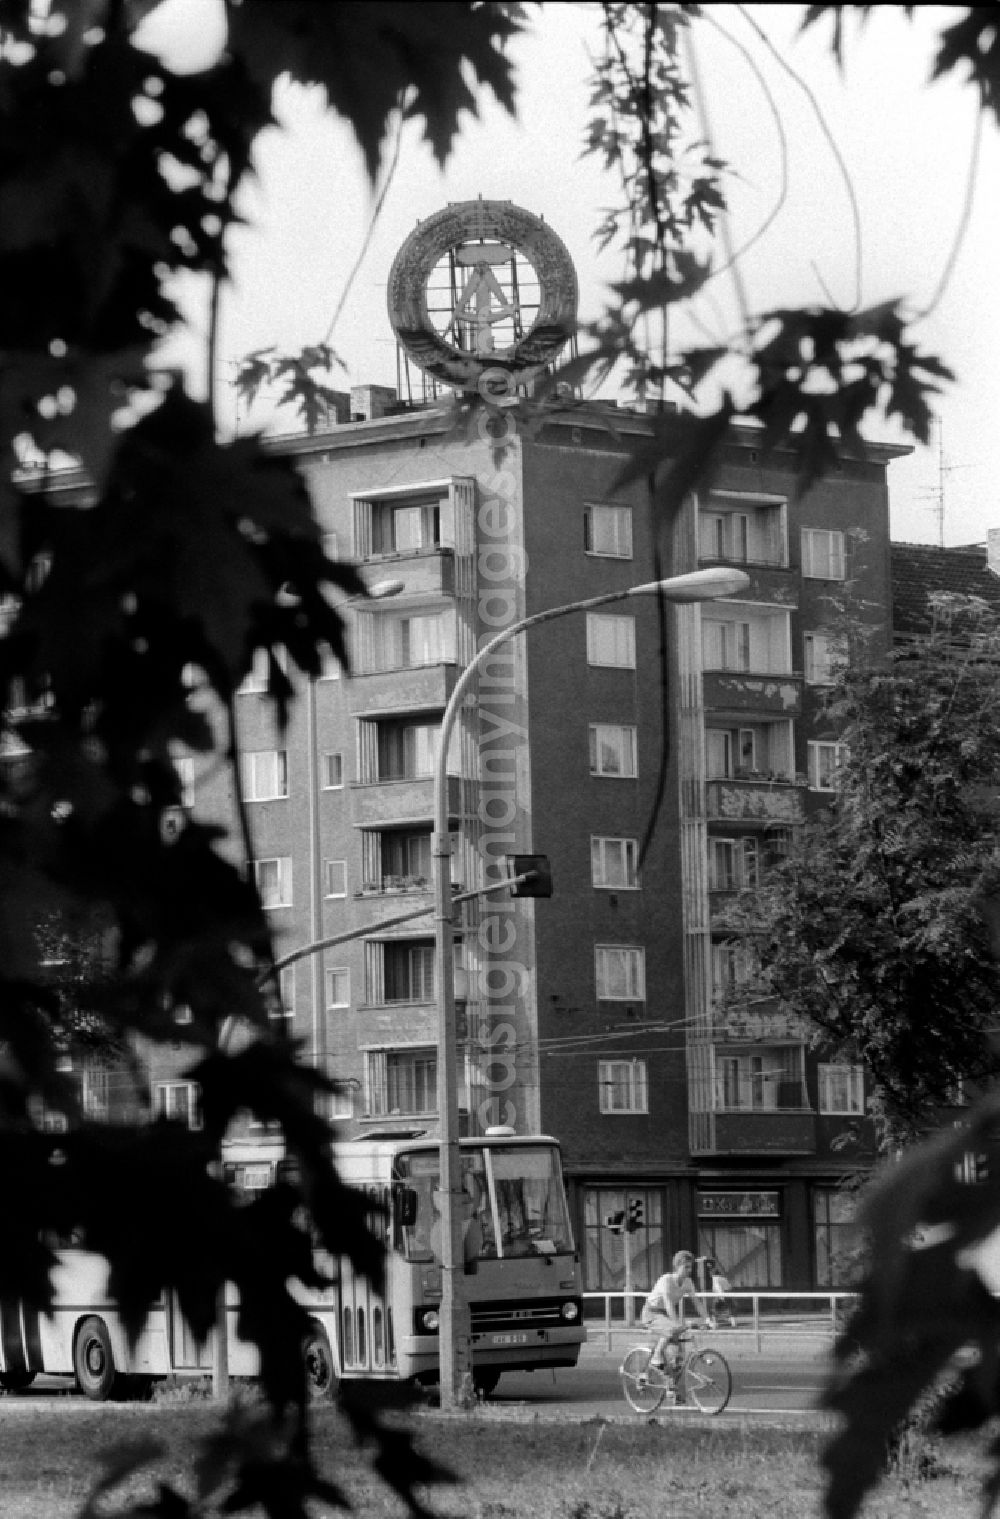 GDR photo archive: Berlin - Emblem und Symbol- Kennzeichen on the roof of a house in the district Friedrichshain in Berlin Eastberlin on the territory of the former GDR, German Democratic Republic